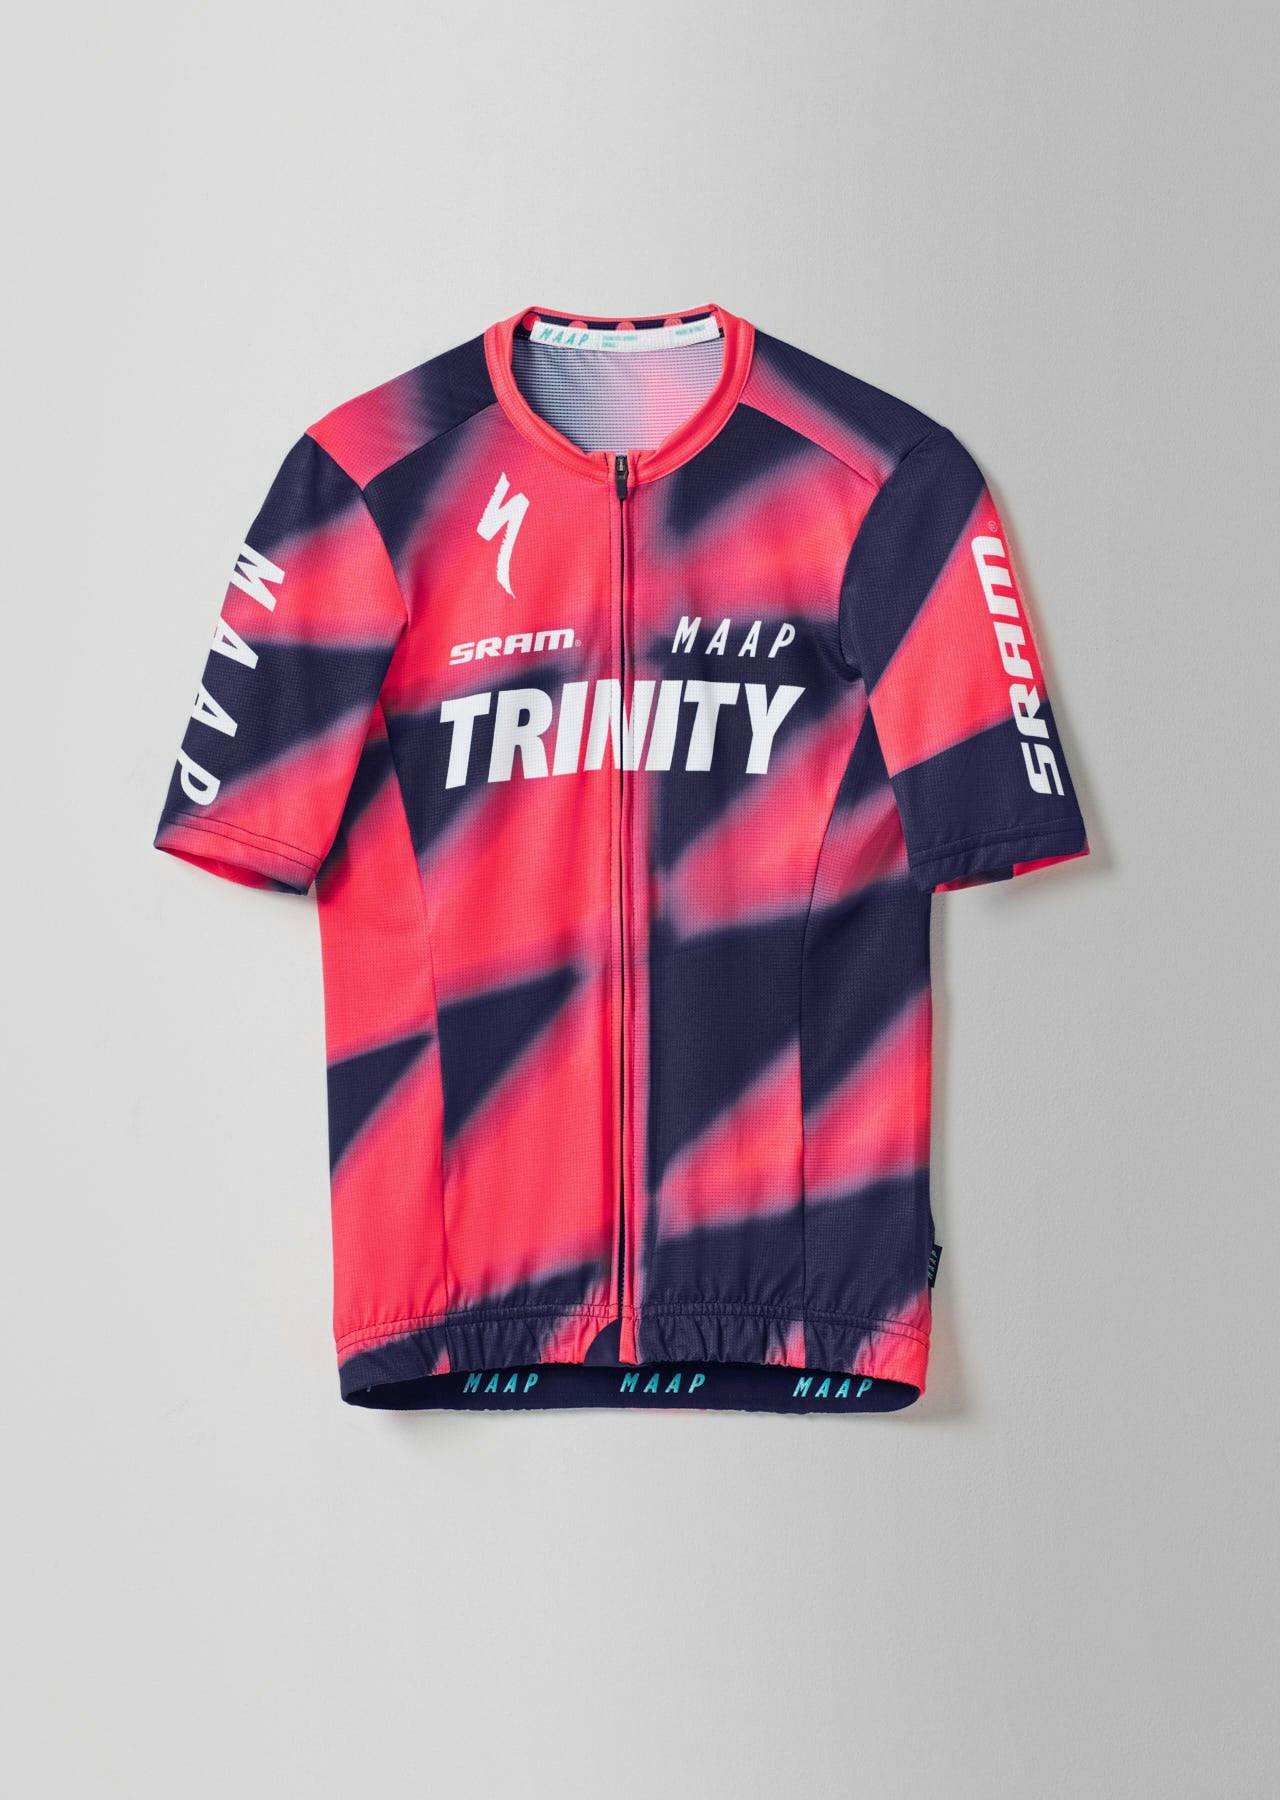 Trinity Racing Supporter Team Jersey